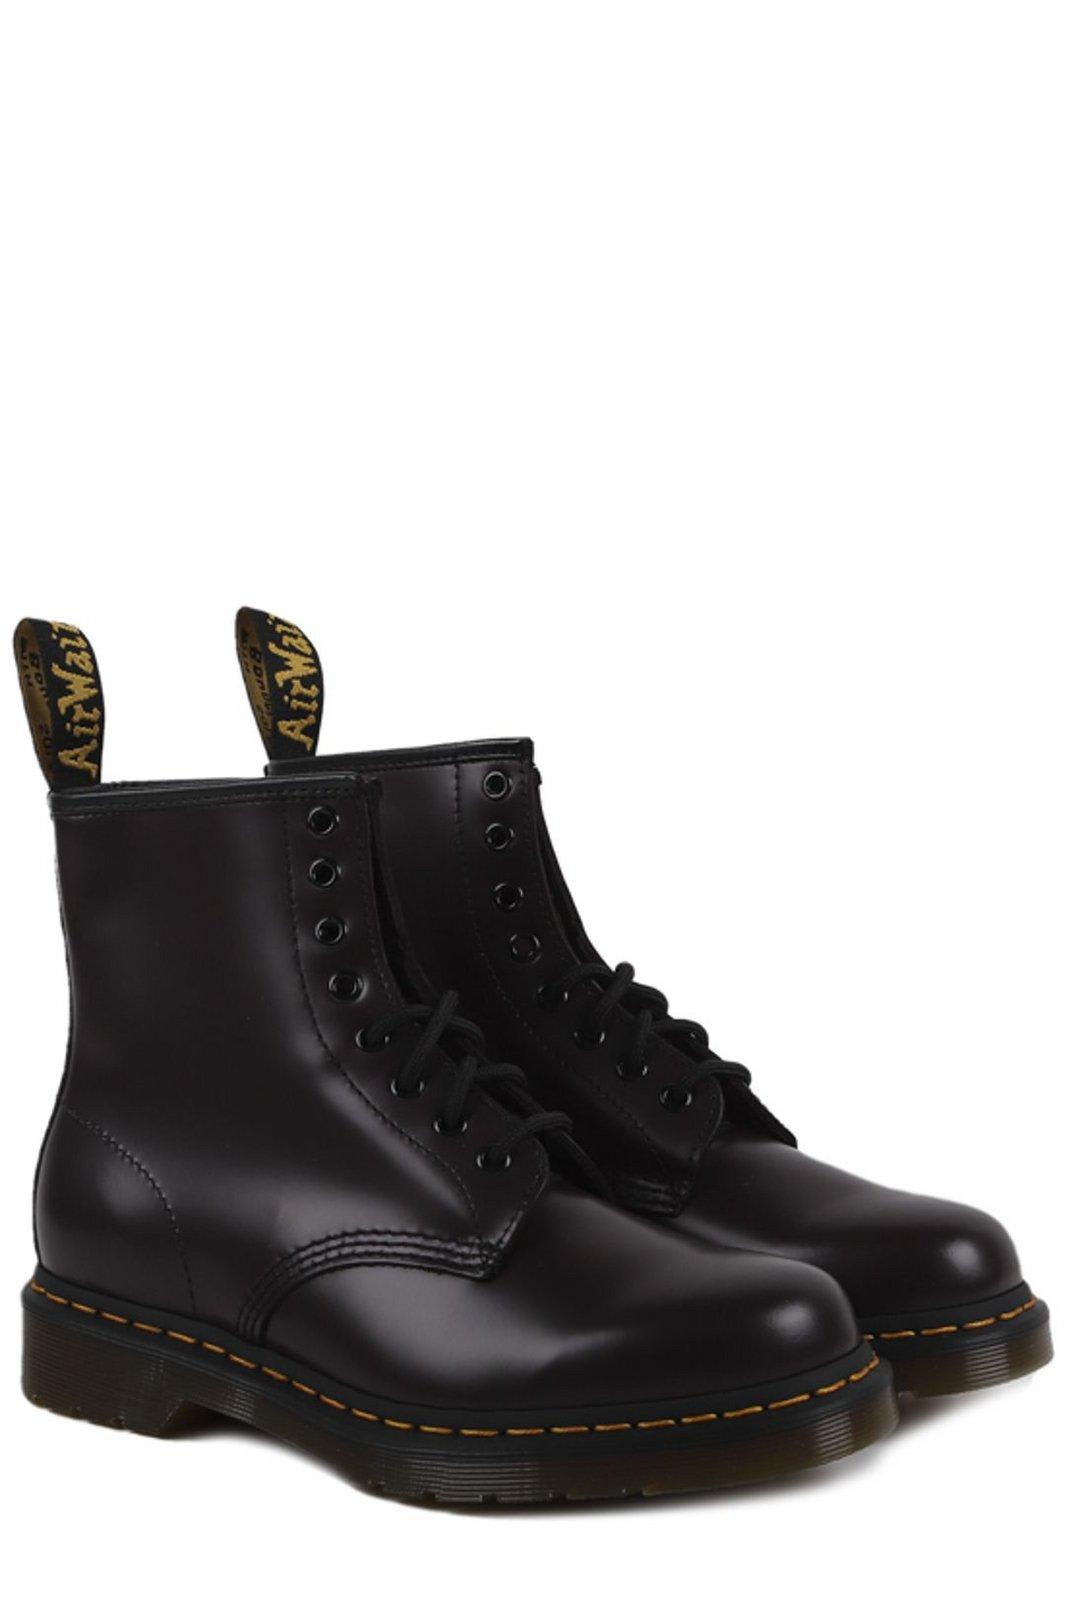 Shop Dr. Martens' 1460 Round Toe Lace-up Boots In Burgundy